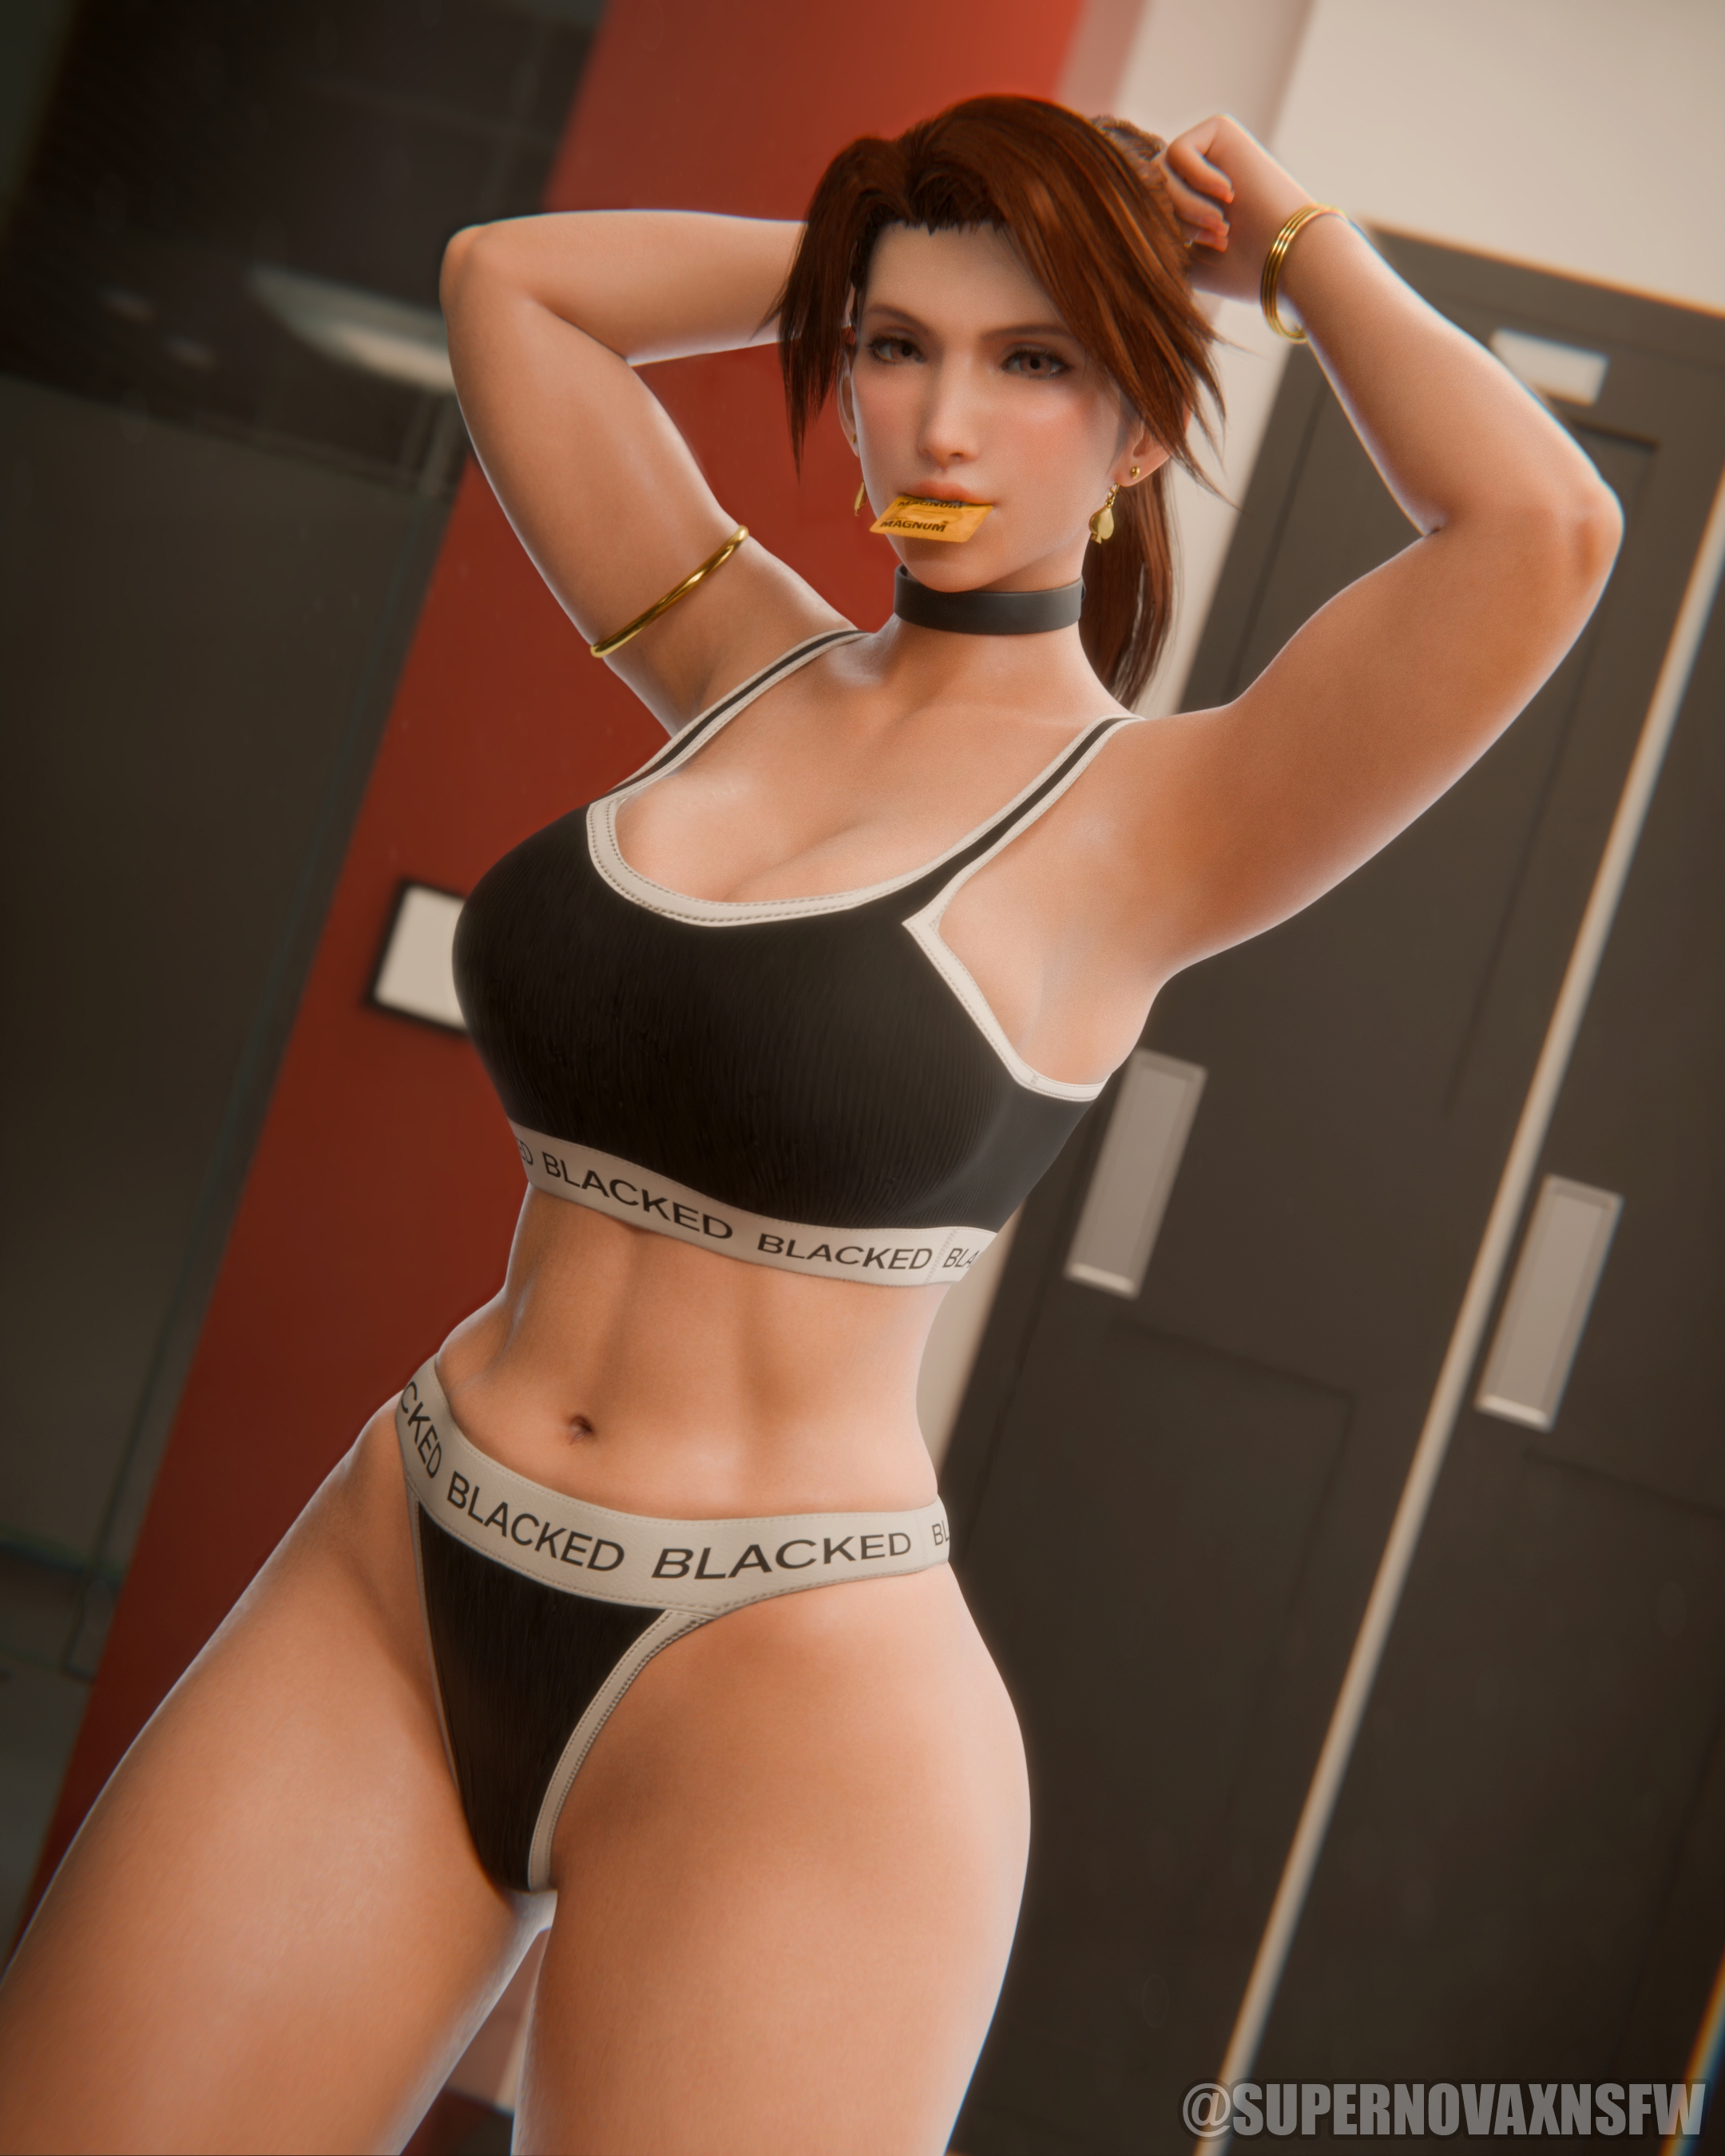 Ready for training! Jessie Rasberry Final Fantasy Final Fantasy 7 Remake Blacked Underwear Condom Fit Big Tits Big boobs Big Ass Abs Thick Thighs Voluptuous Collar Ponytail